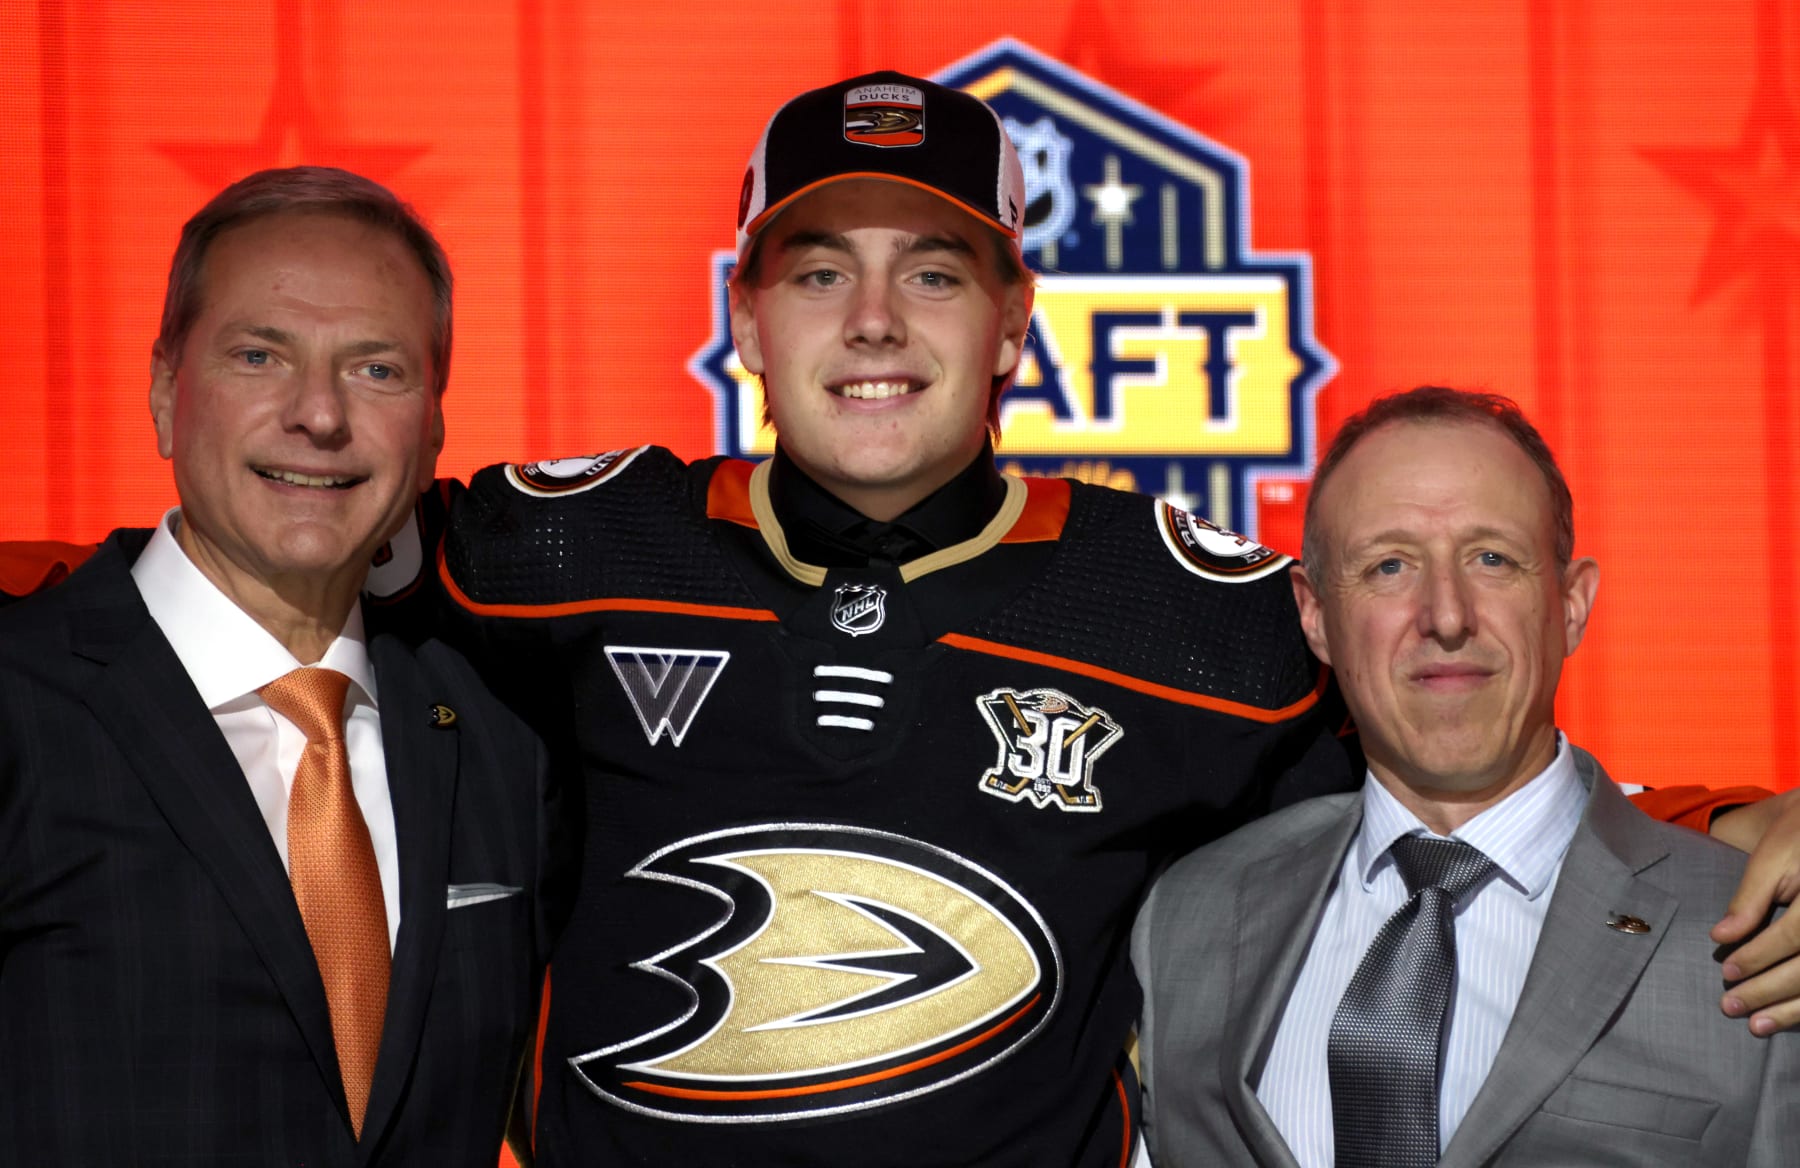 The Senators pleased with strong NHL draft performance